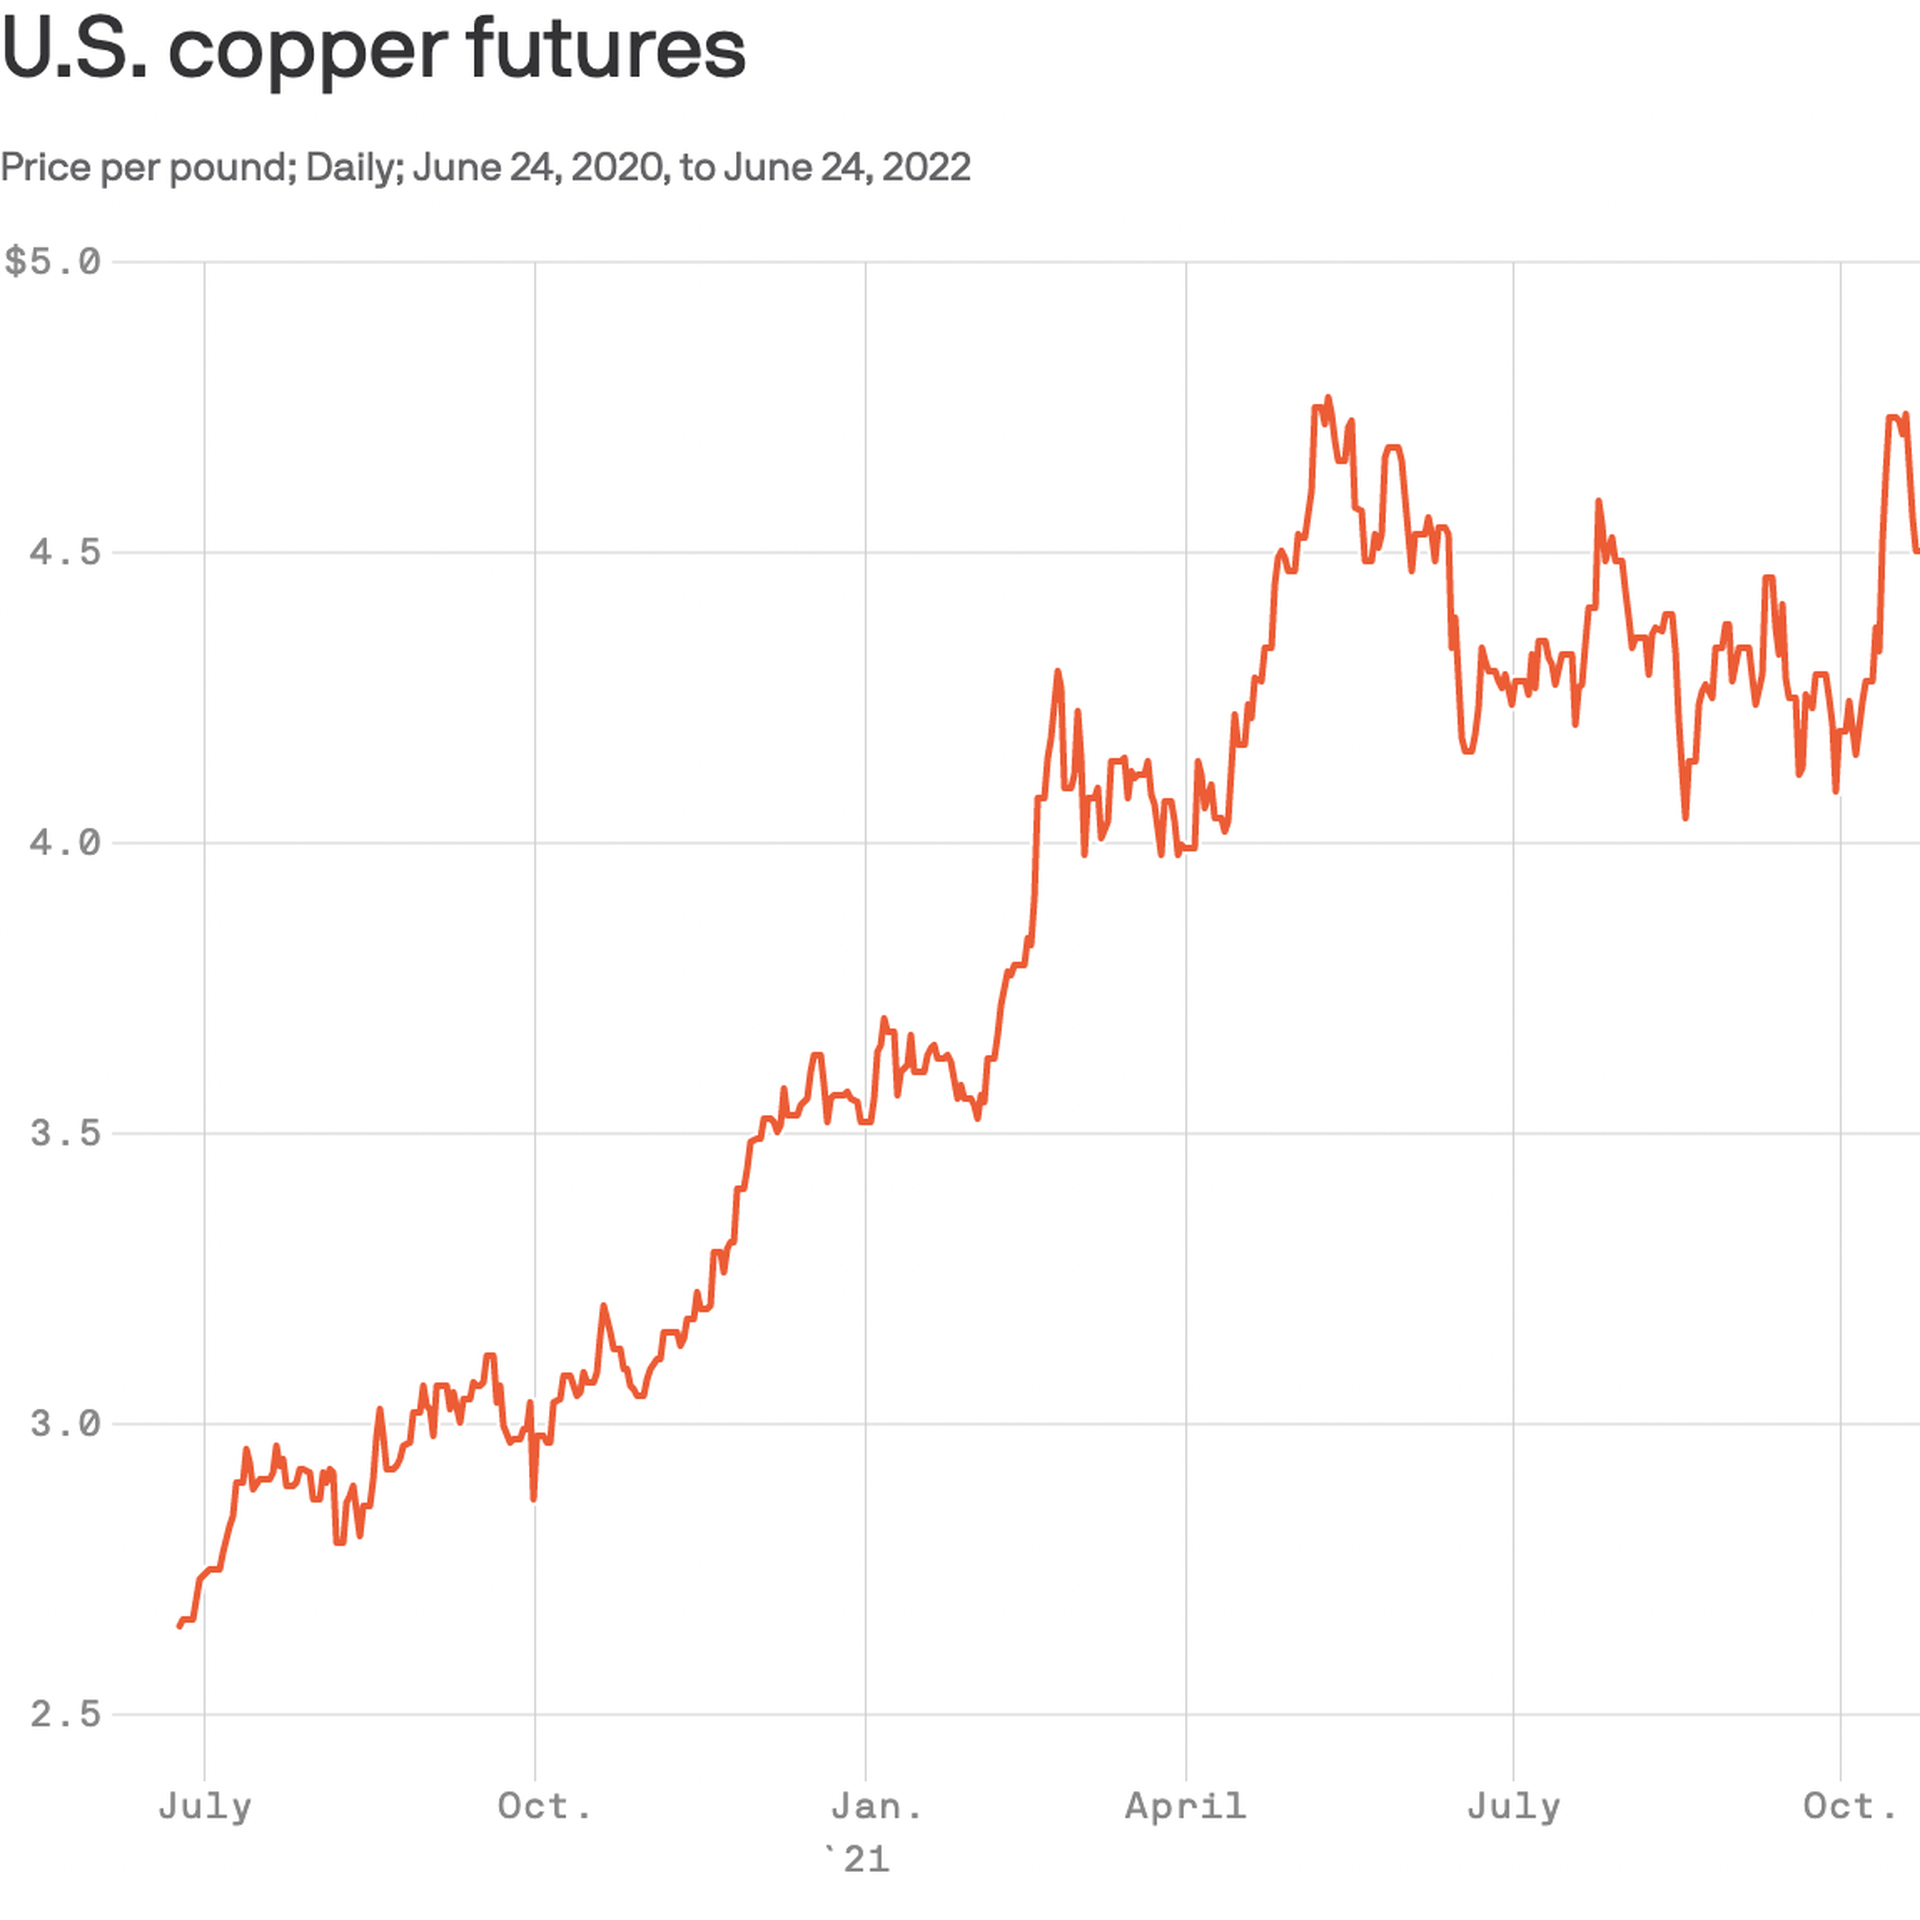 A chart showing U.S. copper futures, daily from June 24, 2020, to June 24, 2022